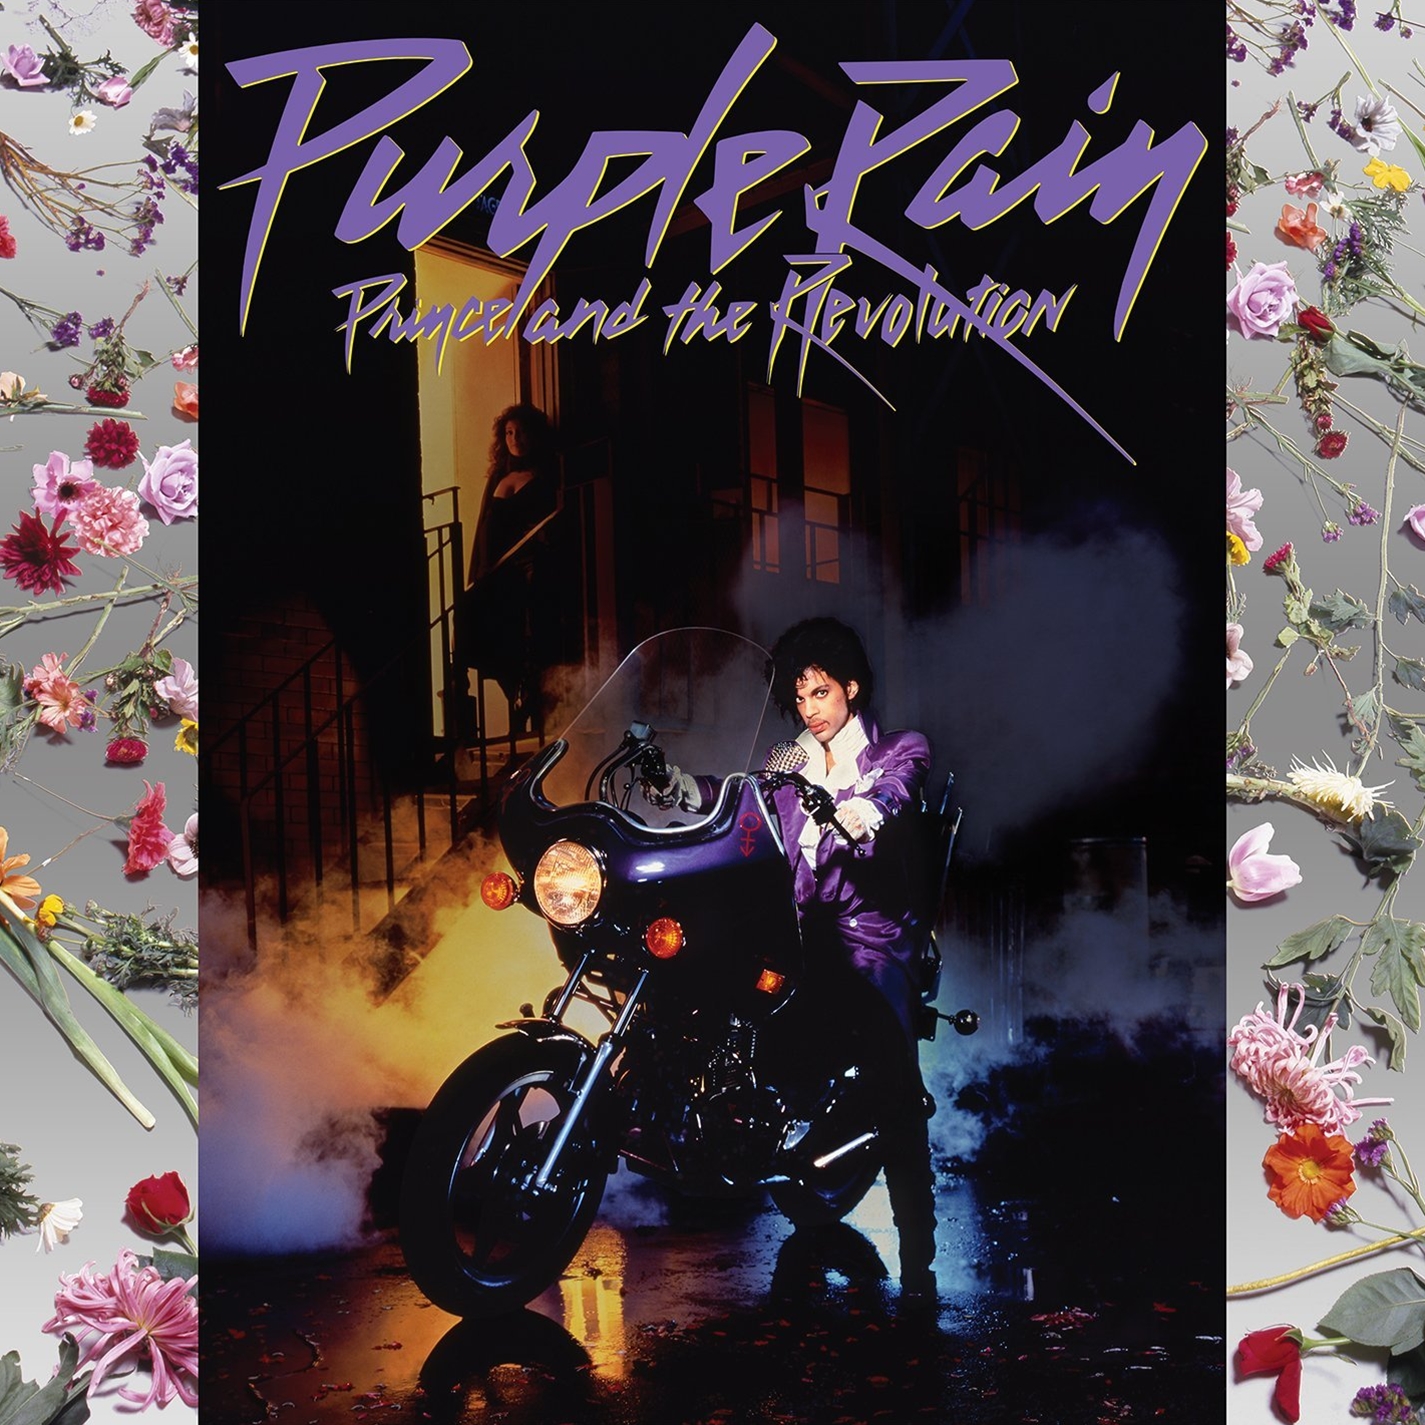 PRINCE & THE REVOLUTION POSTER BB1 PURPLE RAIN A4 A3 SIZE BUY 2 GET ANY 2 FREE 